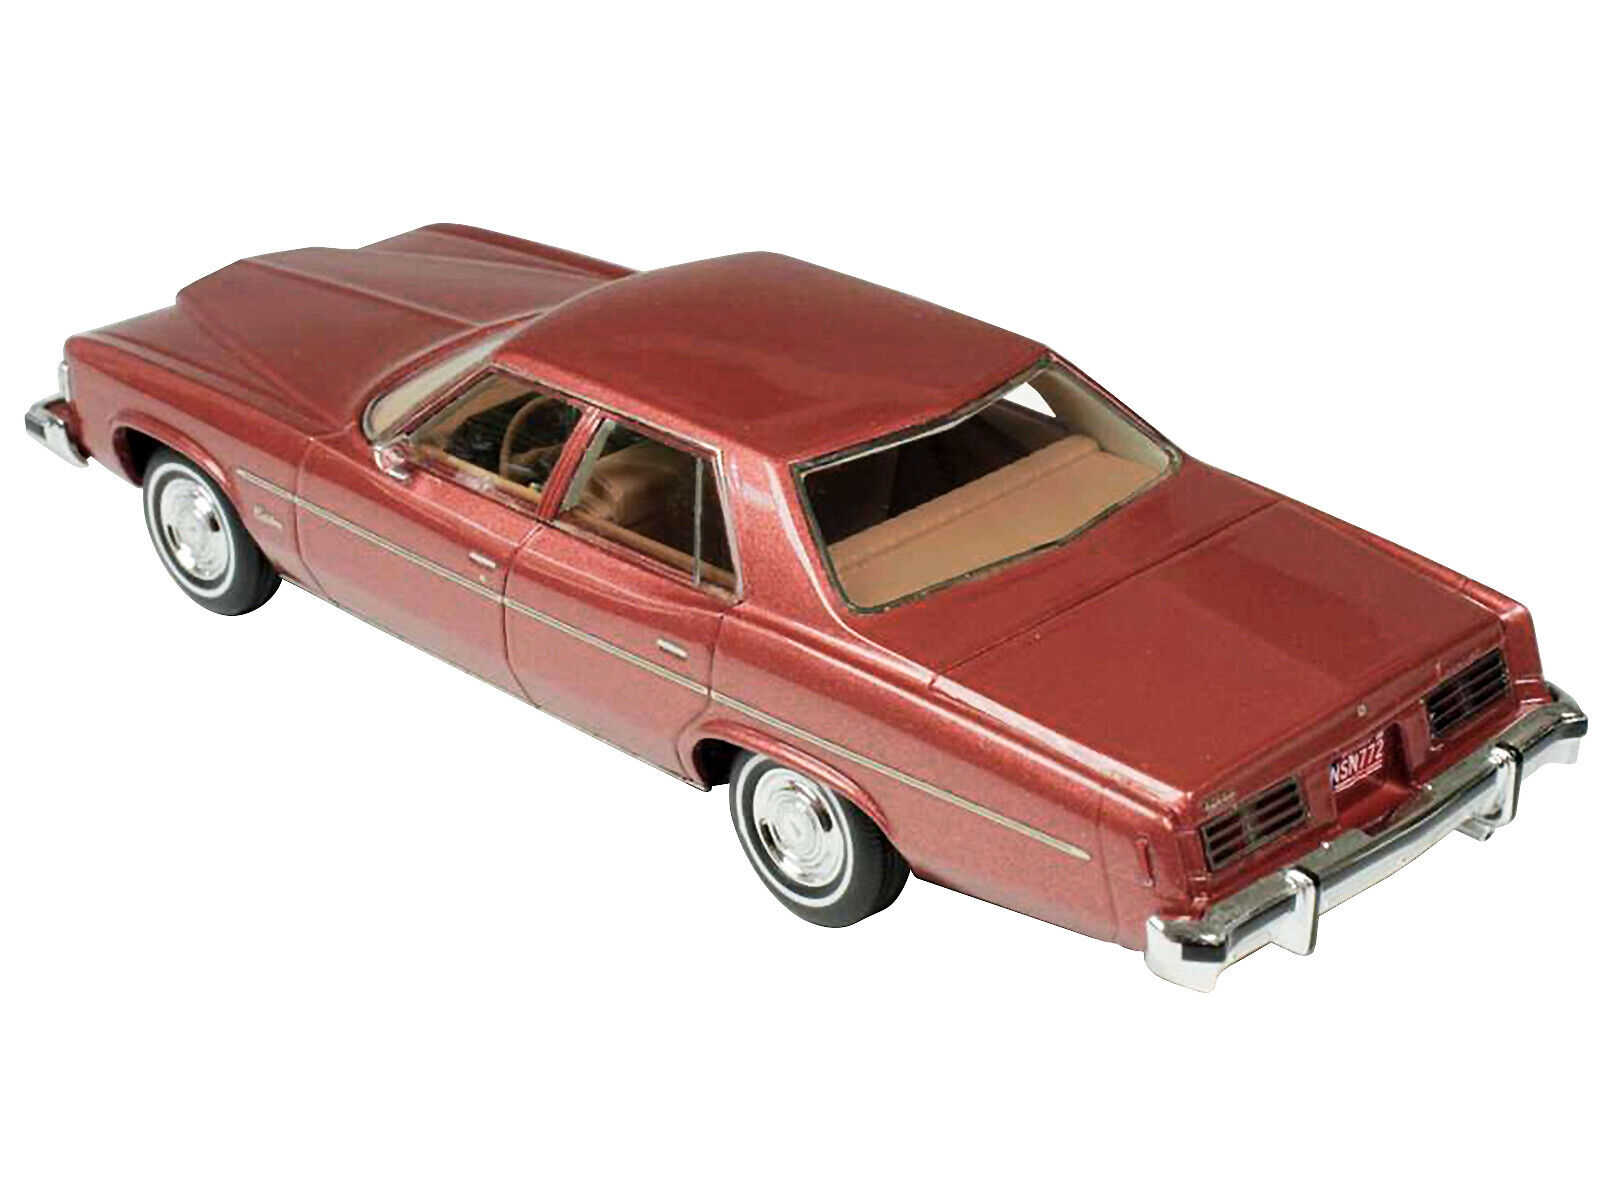 1976 Pontiac Catalina Firethorn Red Metallic Limited Edition to 240 pieces